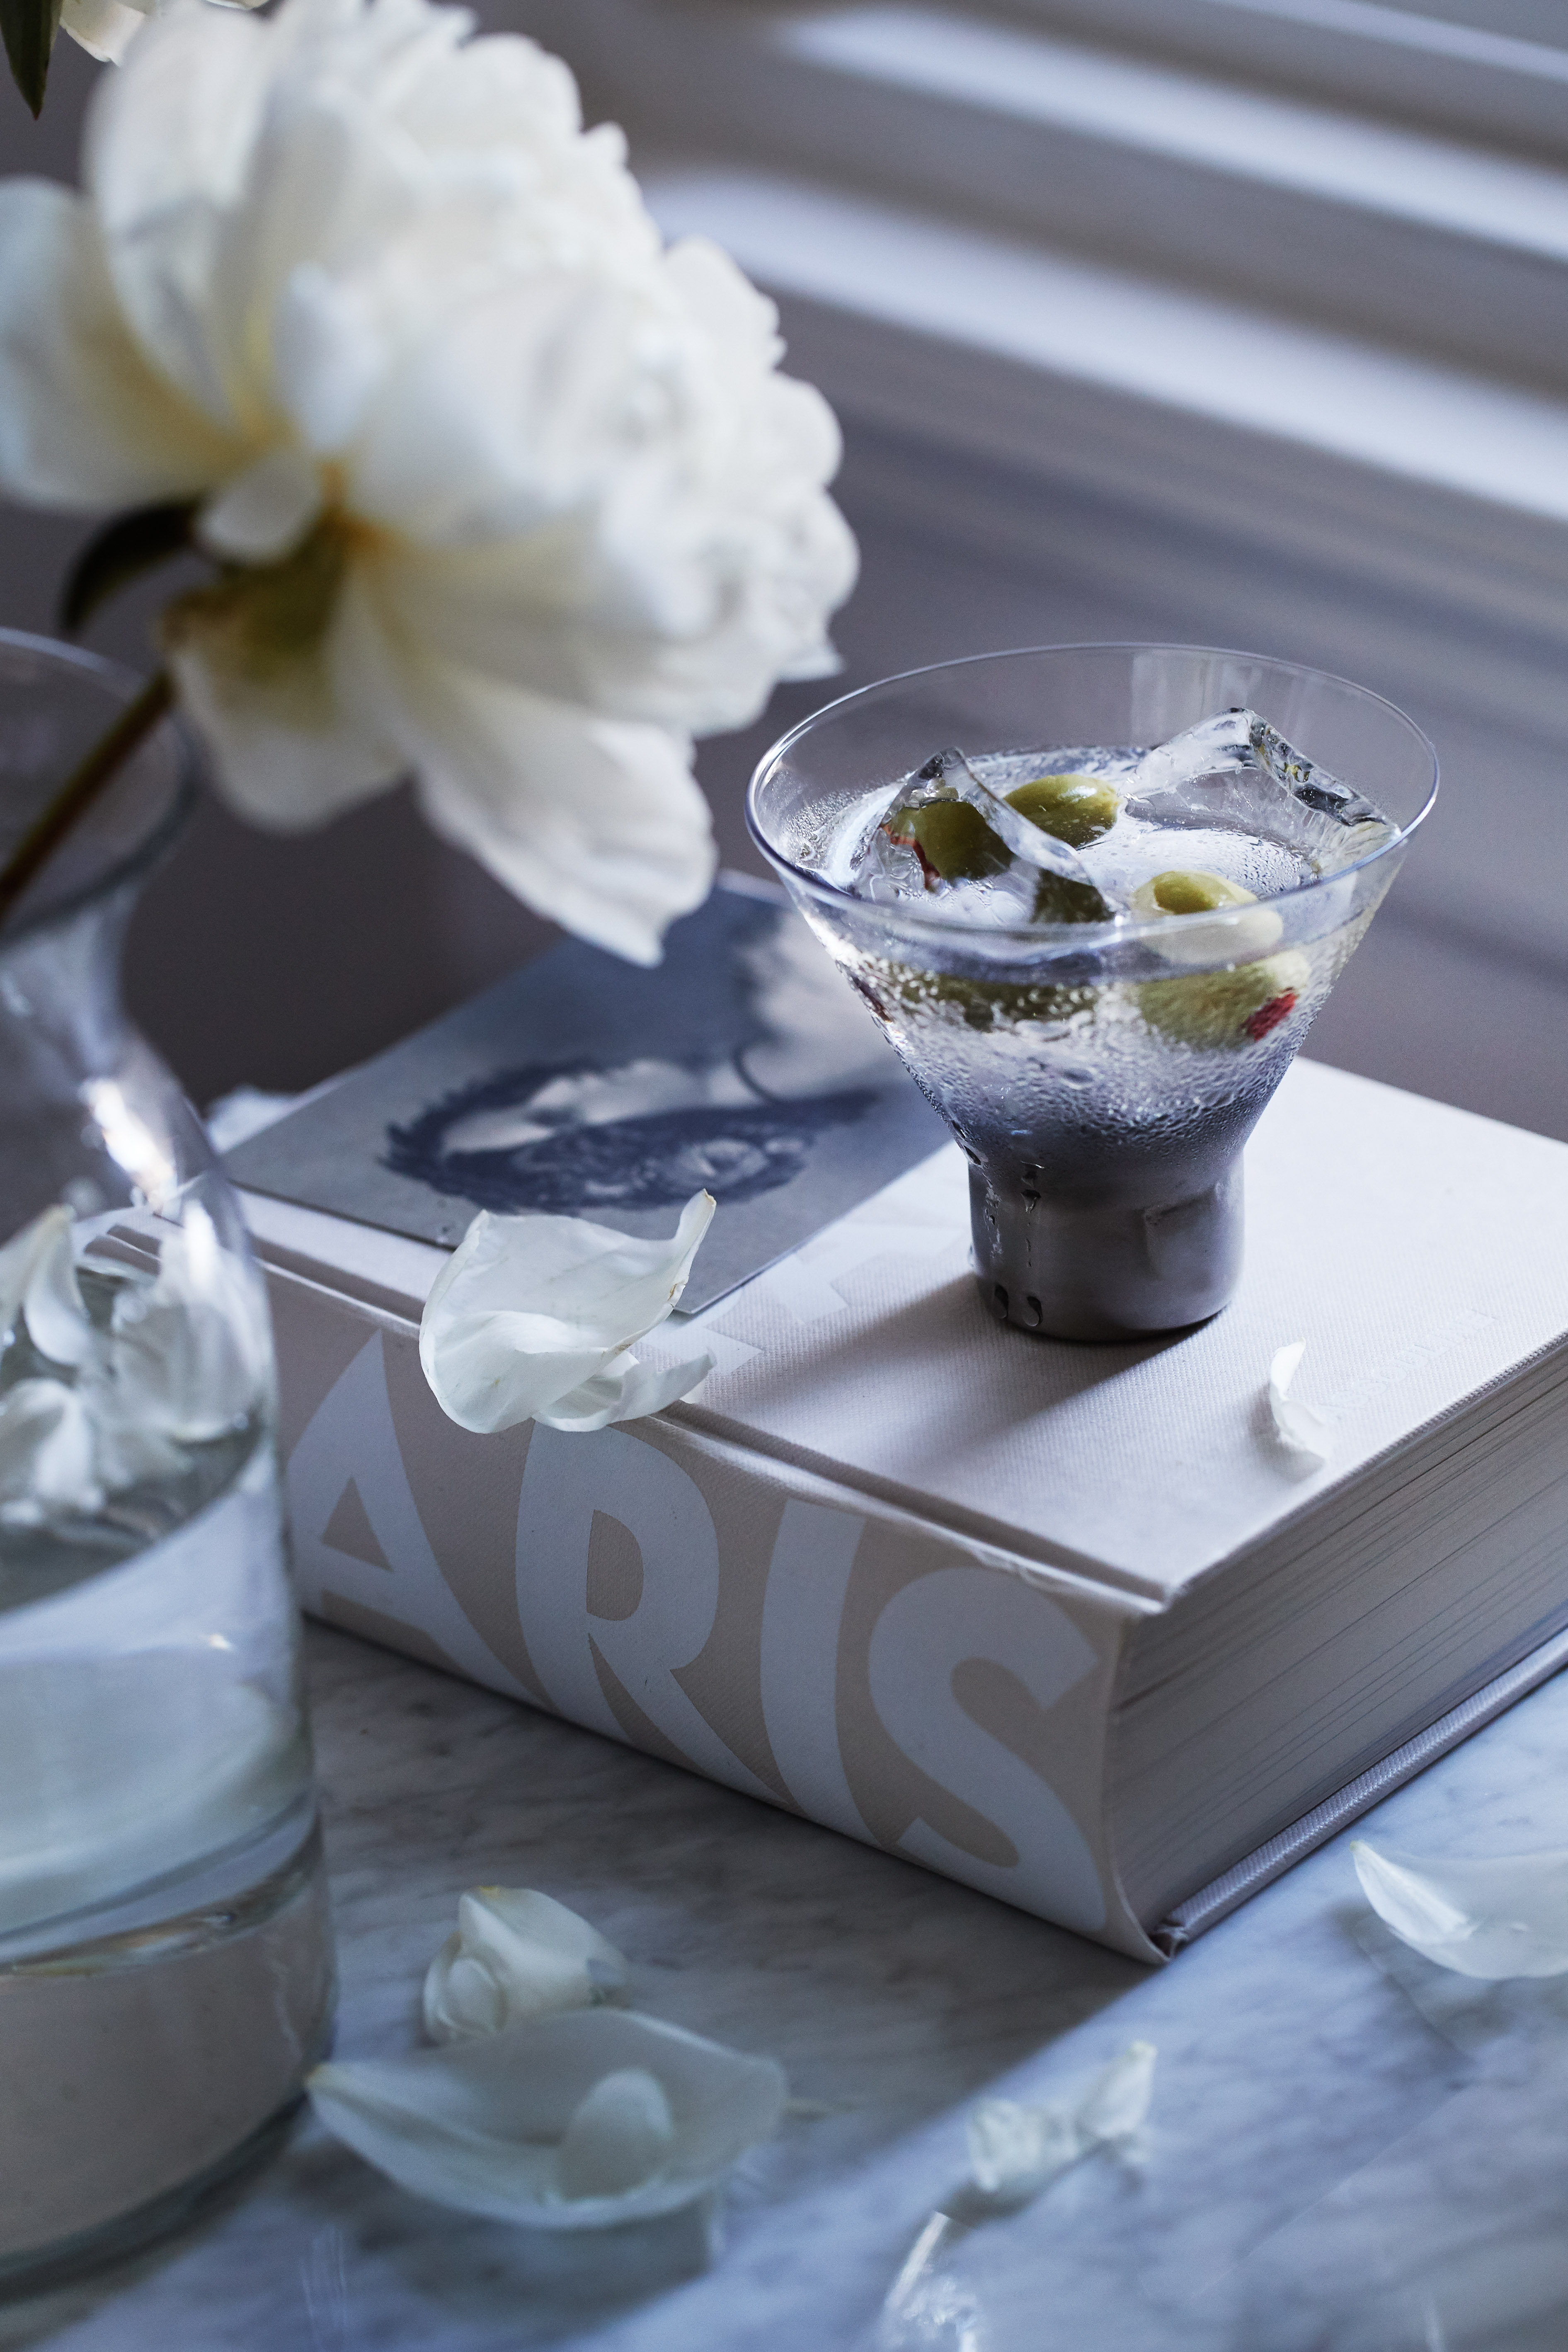 food stylist in San Francisco - Vodka on the rocks with peonies in Paris, photographed by Laurie Frankel photographer